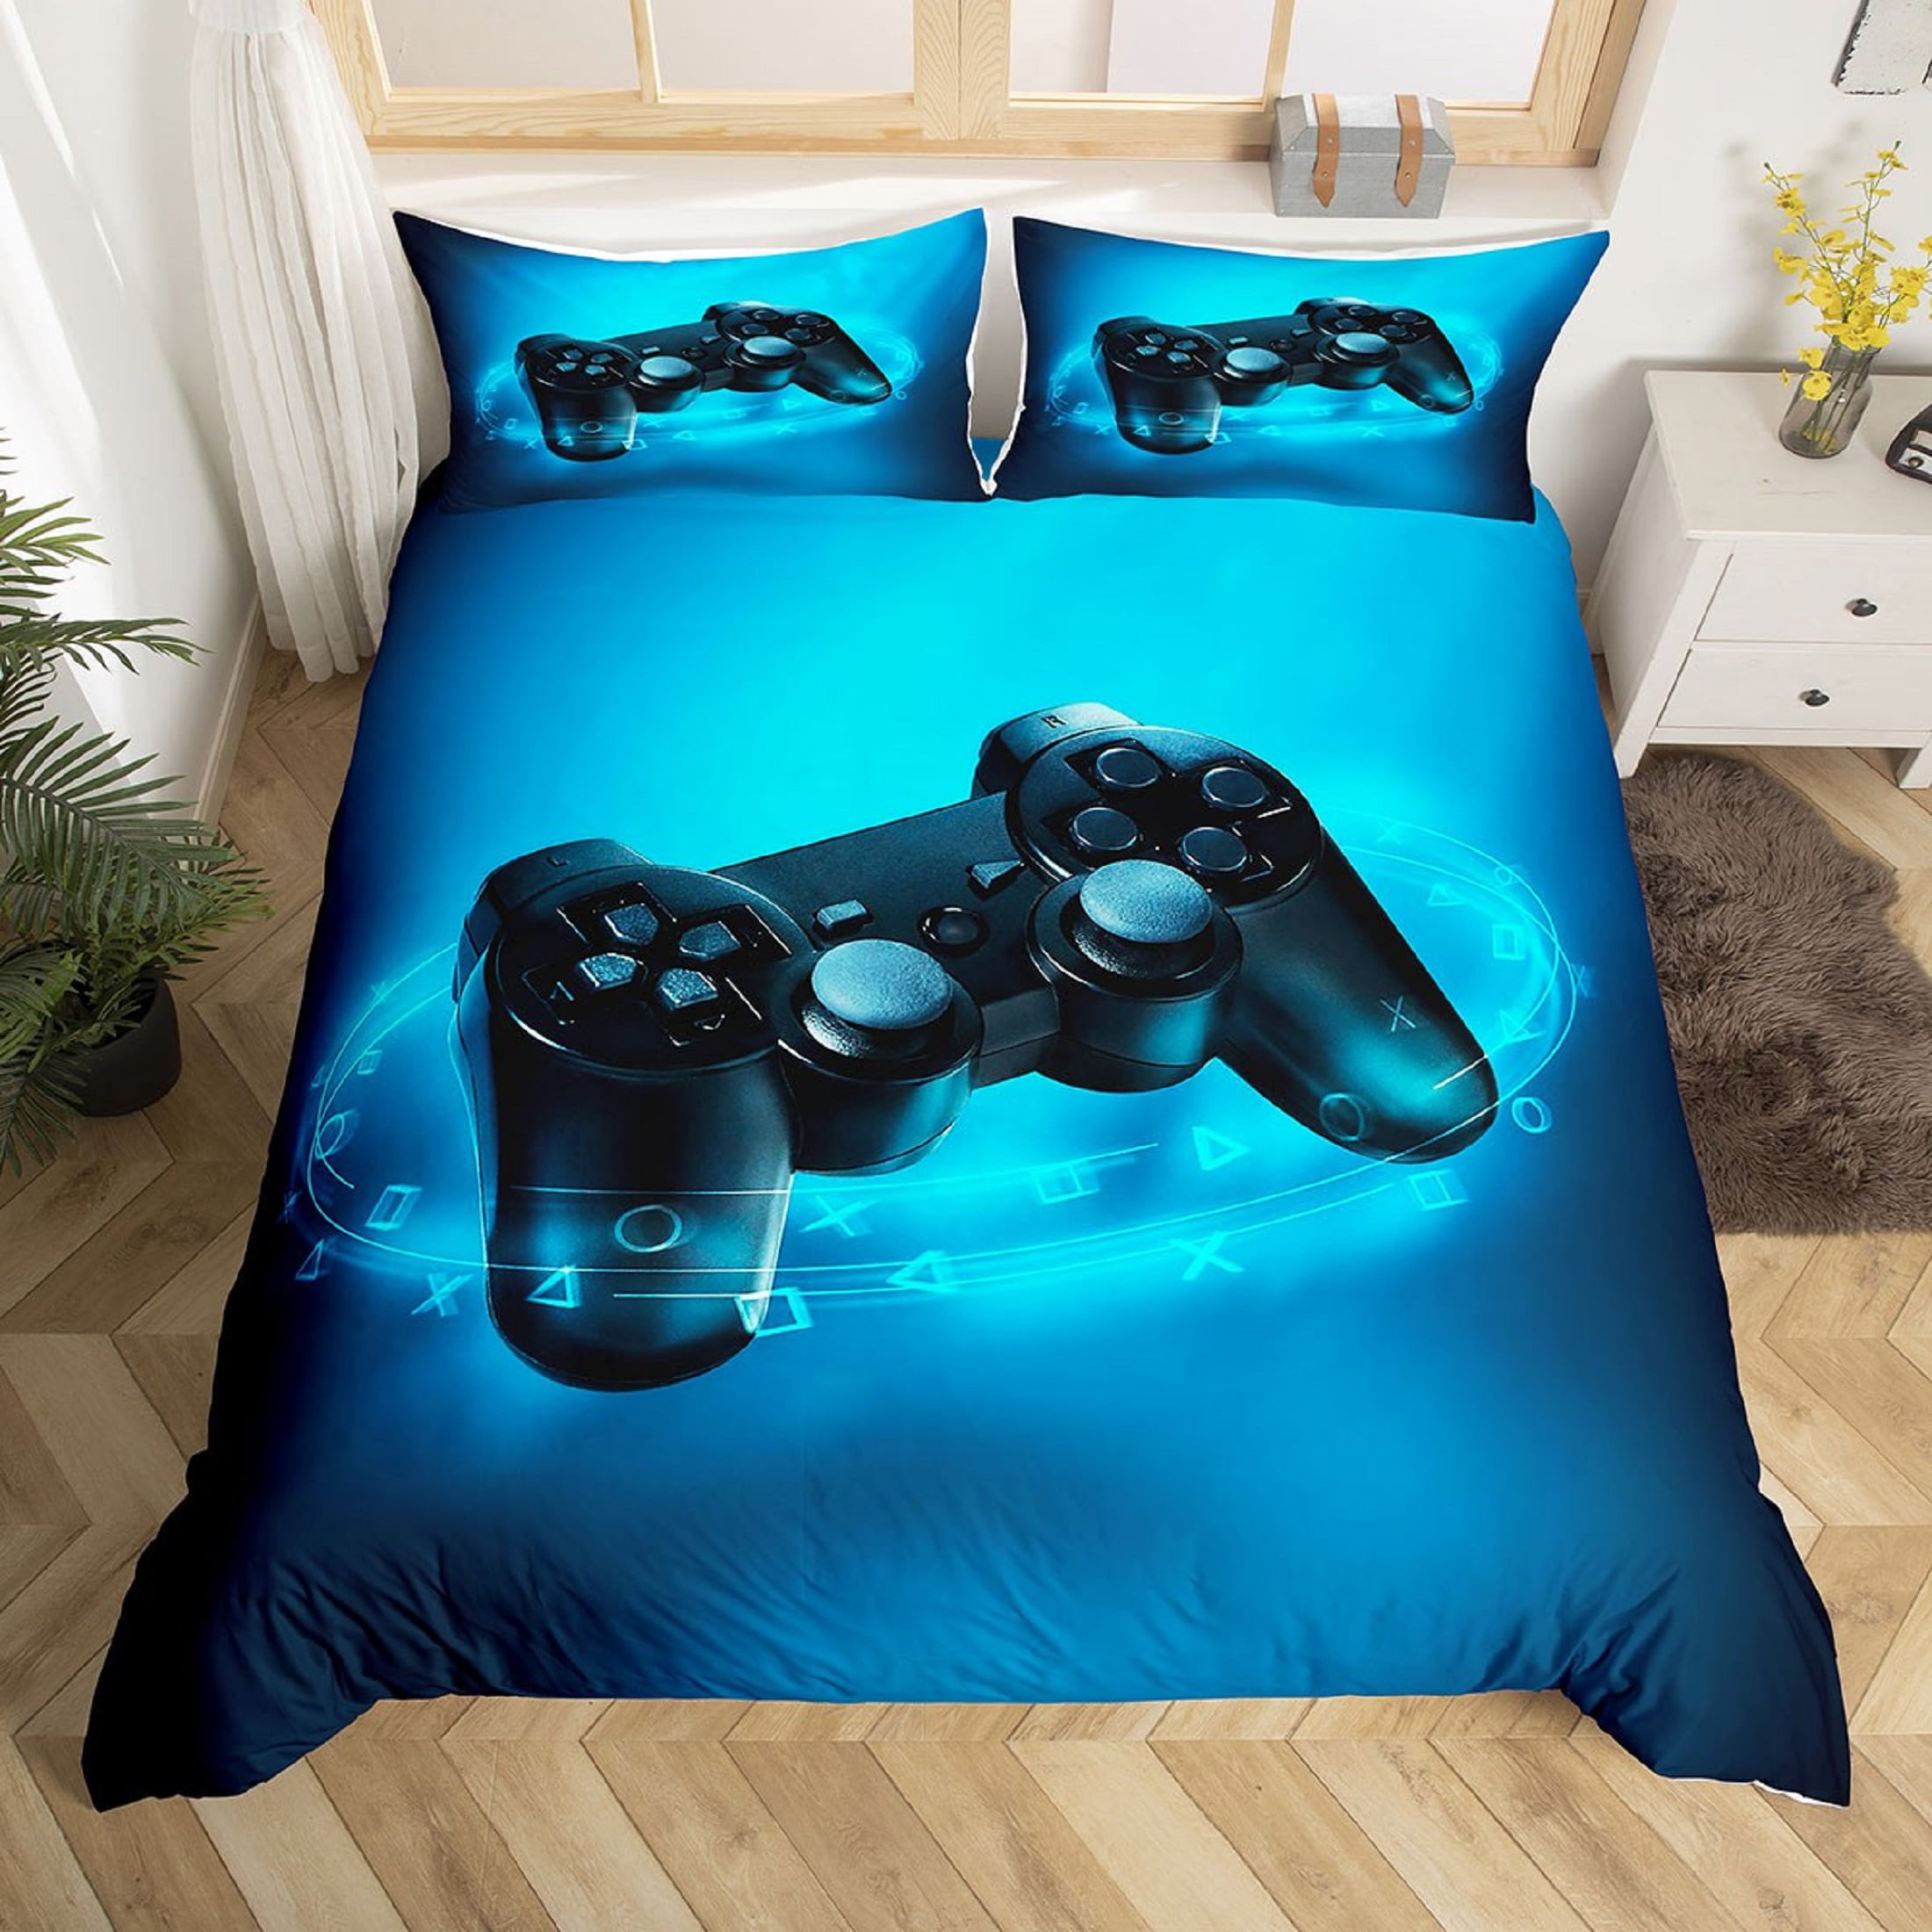 Boys Gamepad Comforter Cover Twin Size No Comforter ,Play Gamer Bedding Set Kids Young Man Video Games Duvet Cover for Teen Child Game Room Decor Black Classic Retro Gaming Quilt Cover with Controller